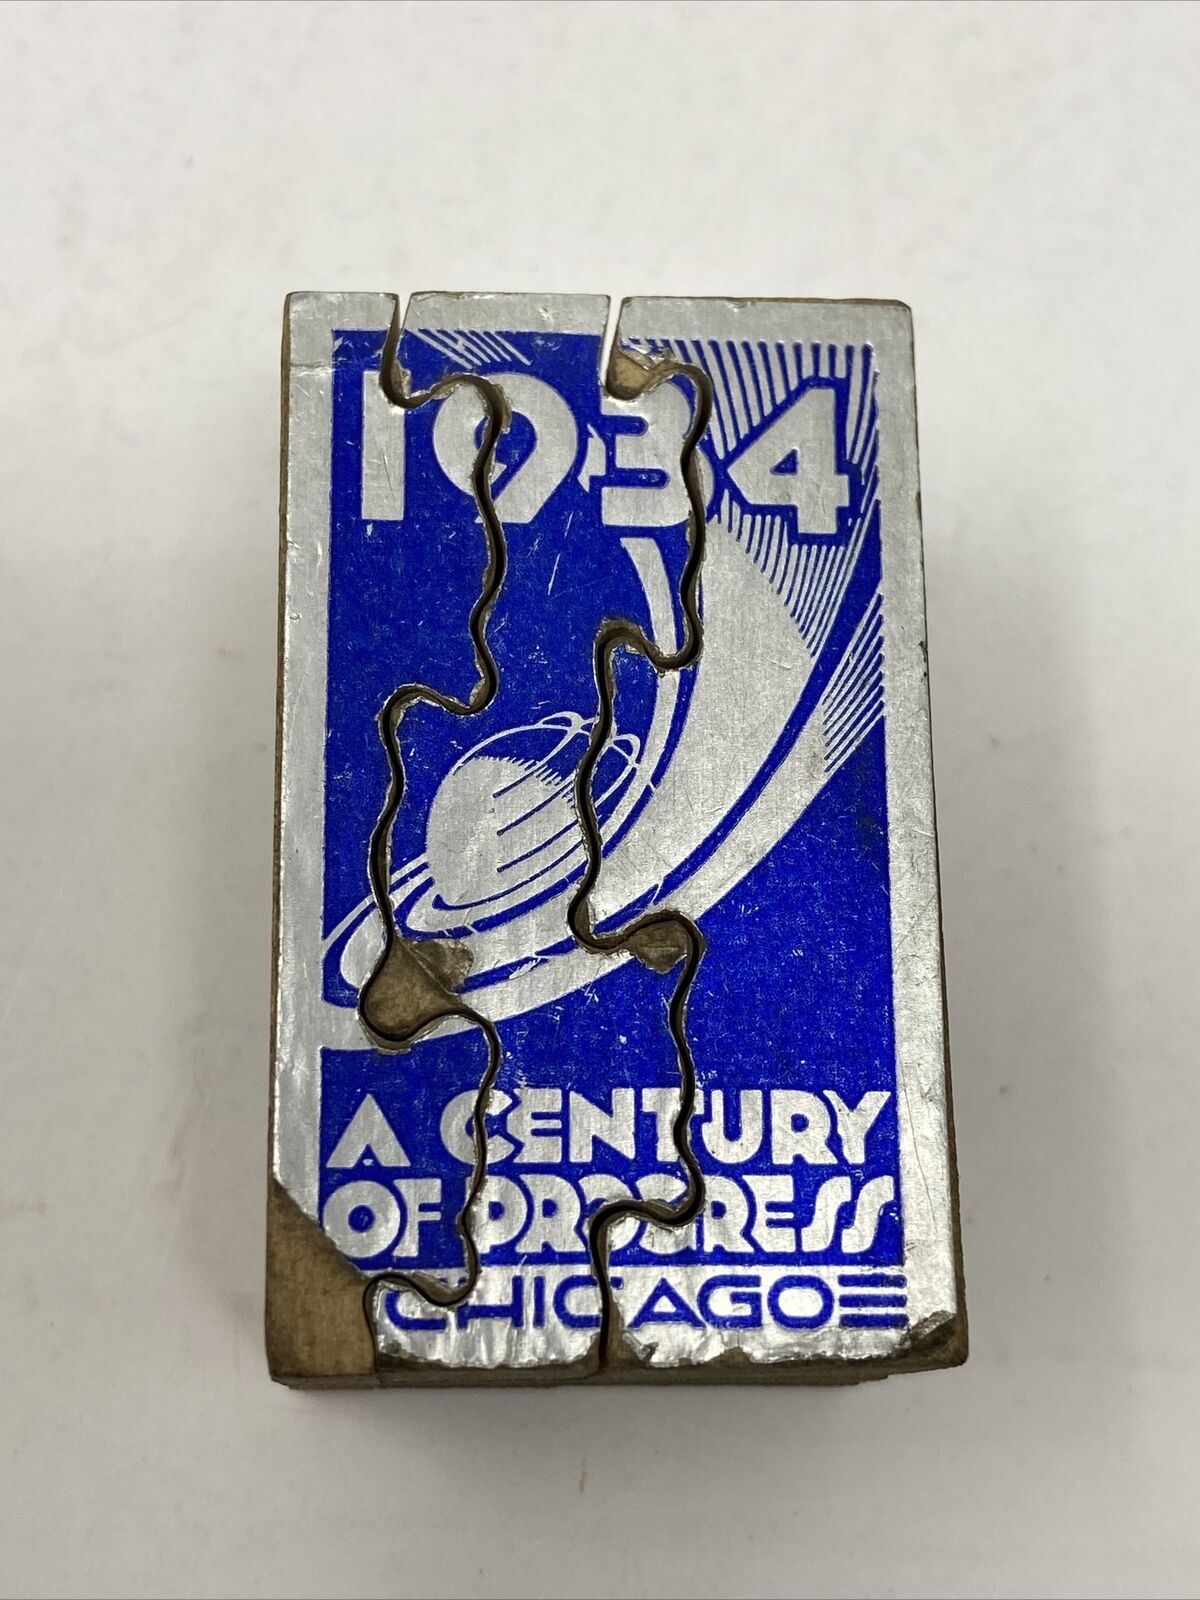 1934 Chicago Worlds Fair Mini Wooden Puzzle Wood A Century of Progress